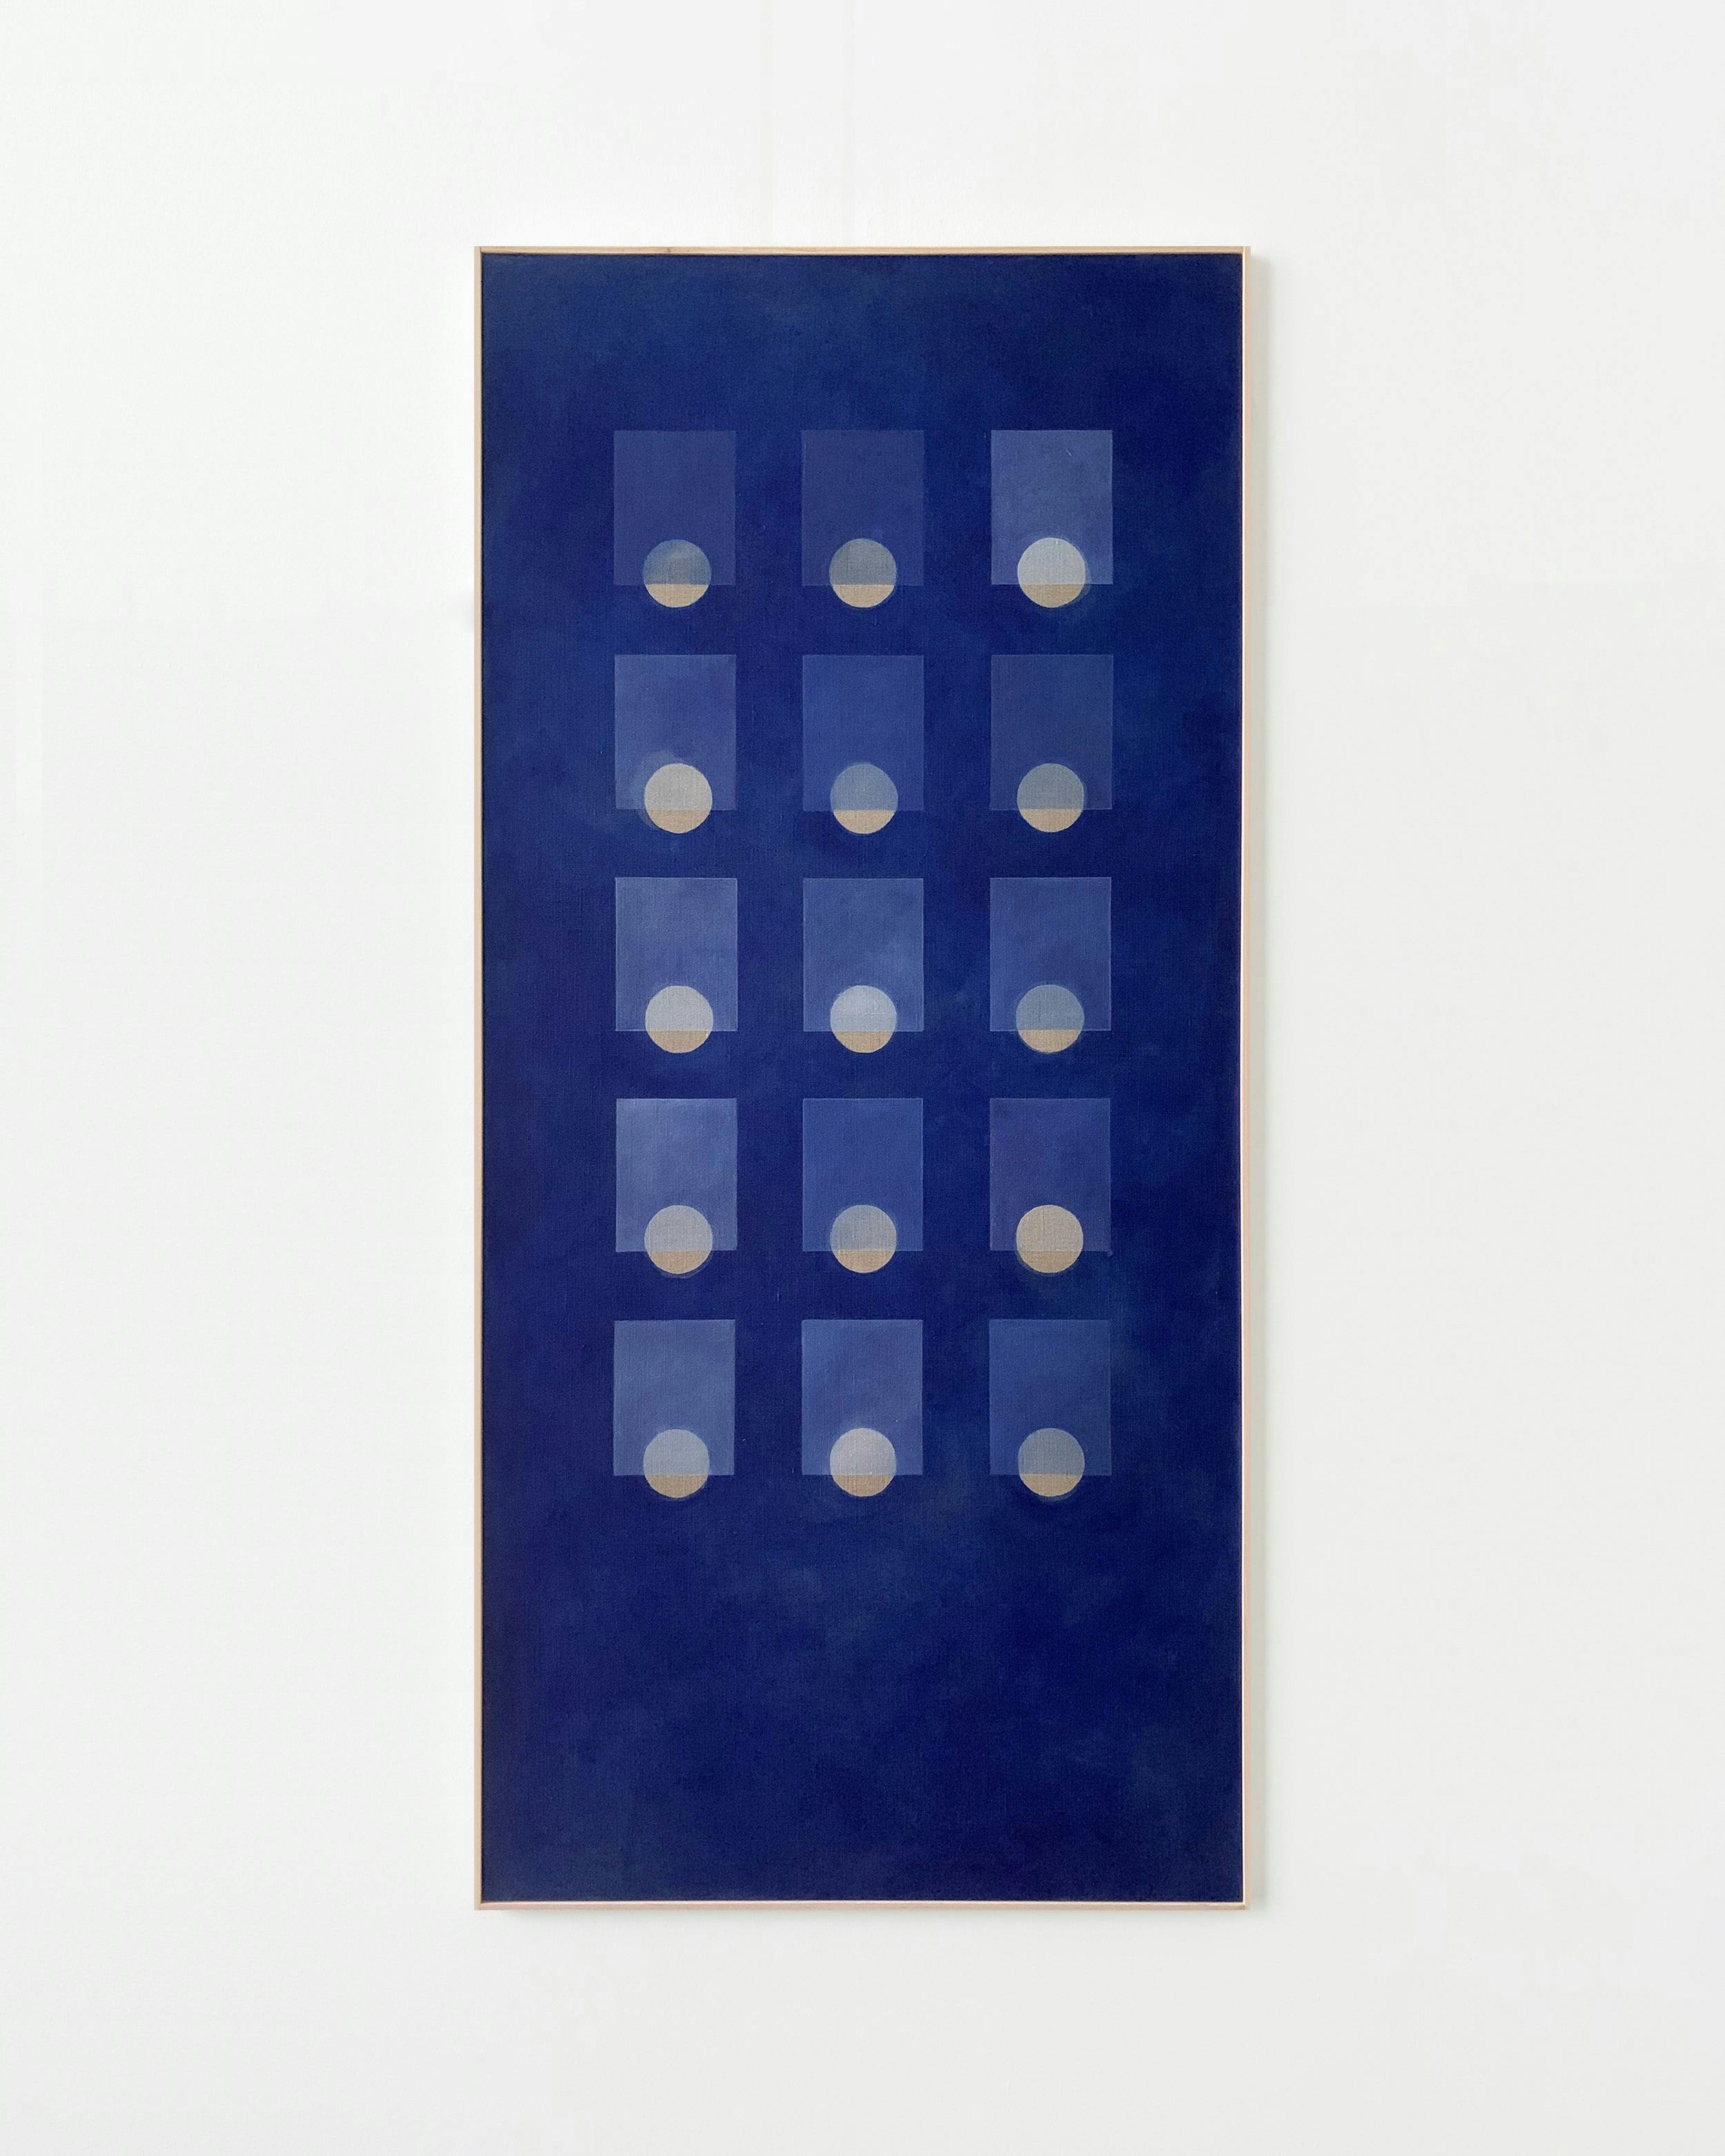 Painting by Carla Weeks titled "Winter Grid in French Ultramarine 2".